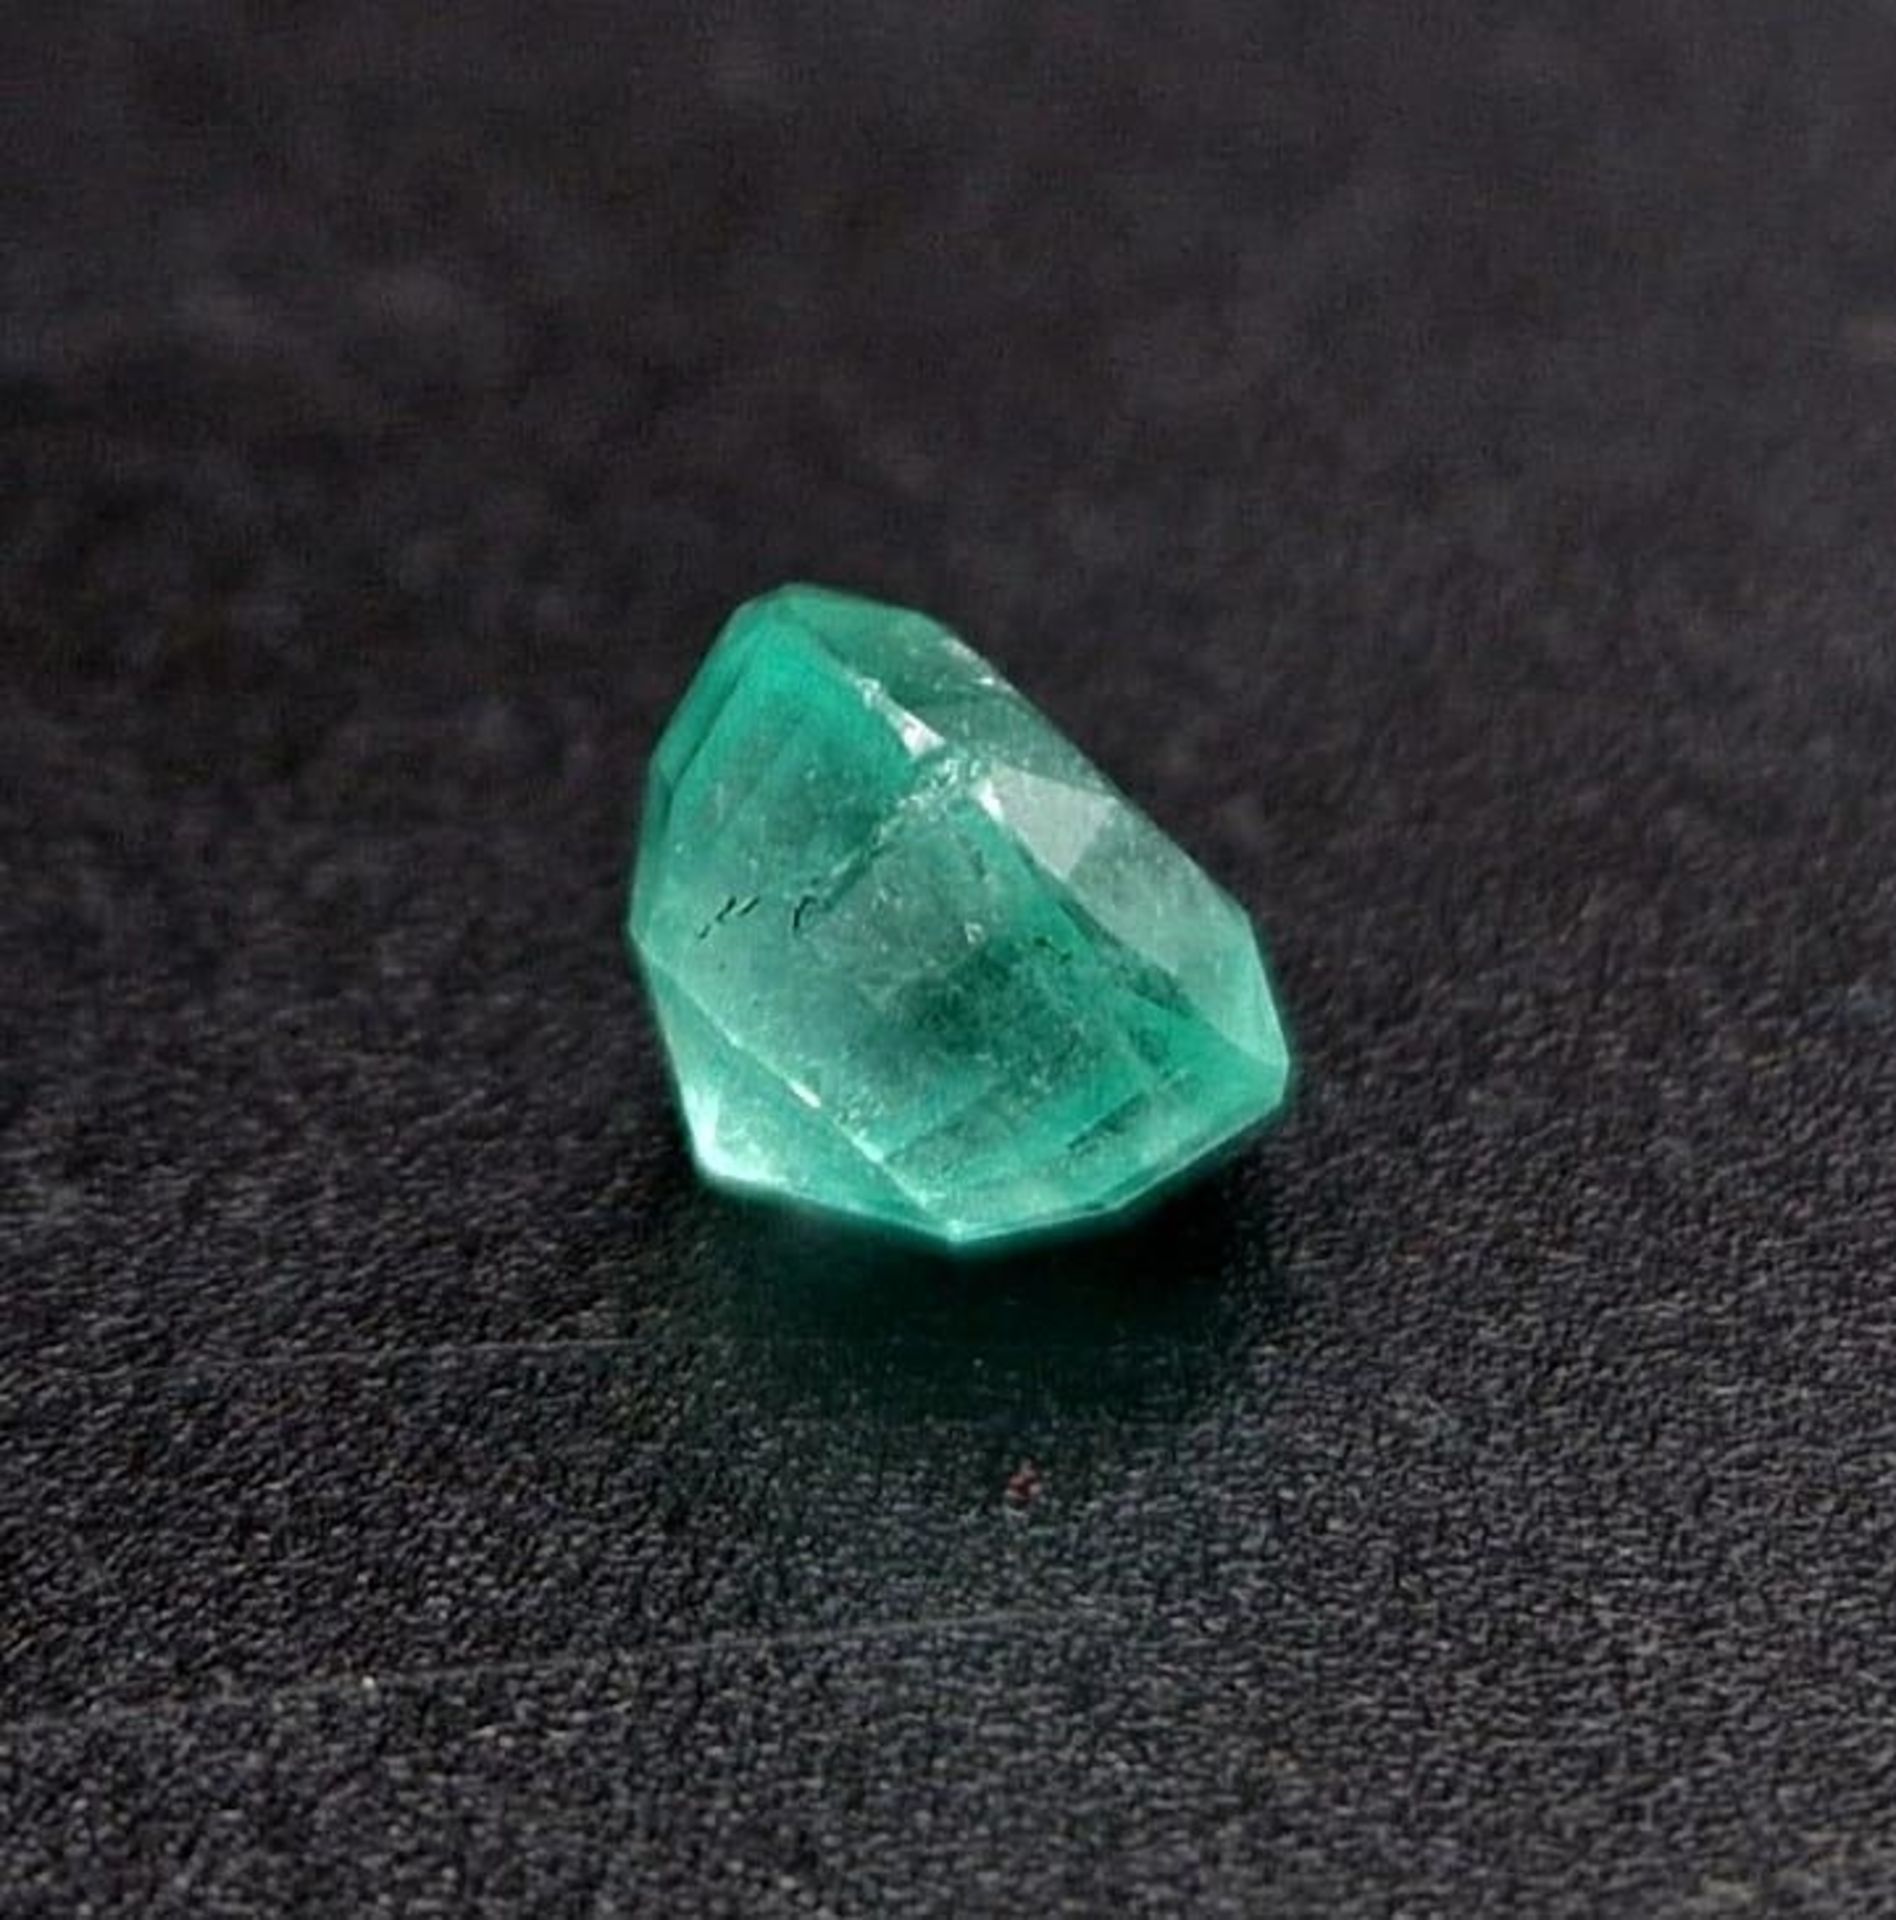 A Rare 2.01ct Oval Cut Emerald from Afghanistan. Untreated, and comes with a GGI certificate. - Image 4 of 5